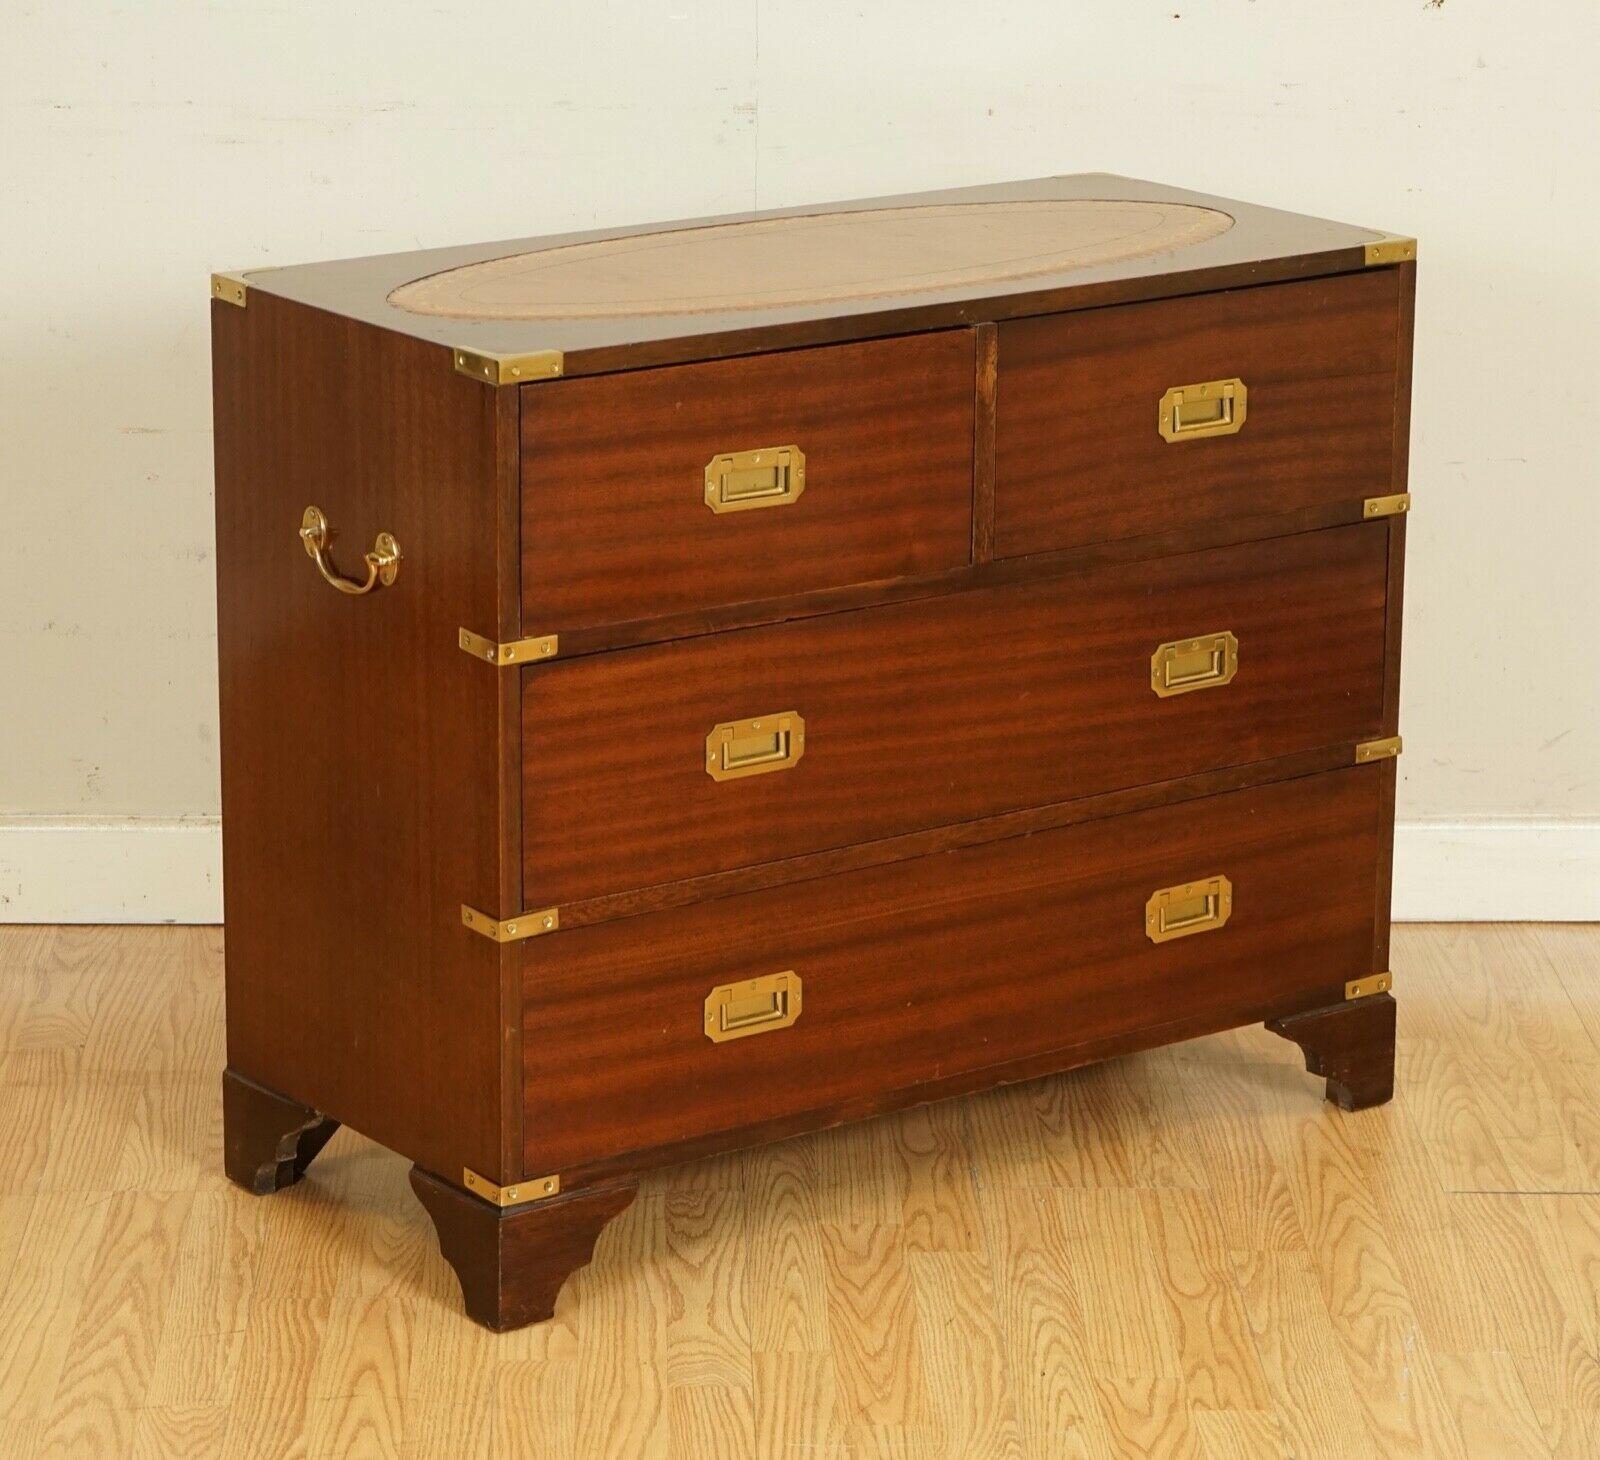 We are so excited to present to you this Outstanding Vintage Bevan Funnell Chest.

A very well made and solid chest, there are some light surface scratches etc so please do look at the pictures carefully before purchasing.

We have lightly